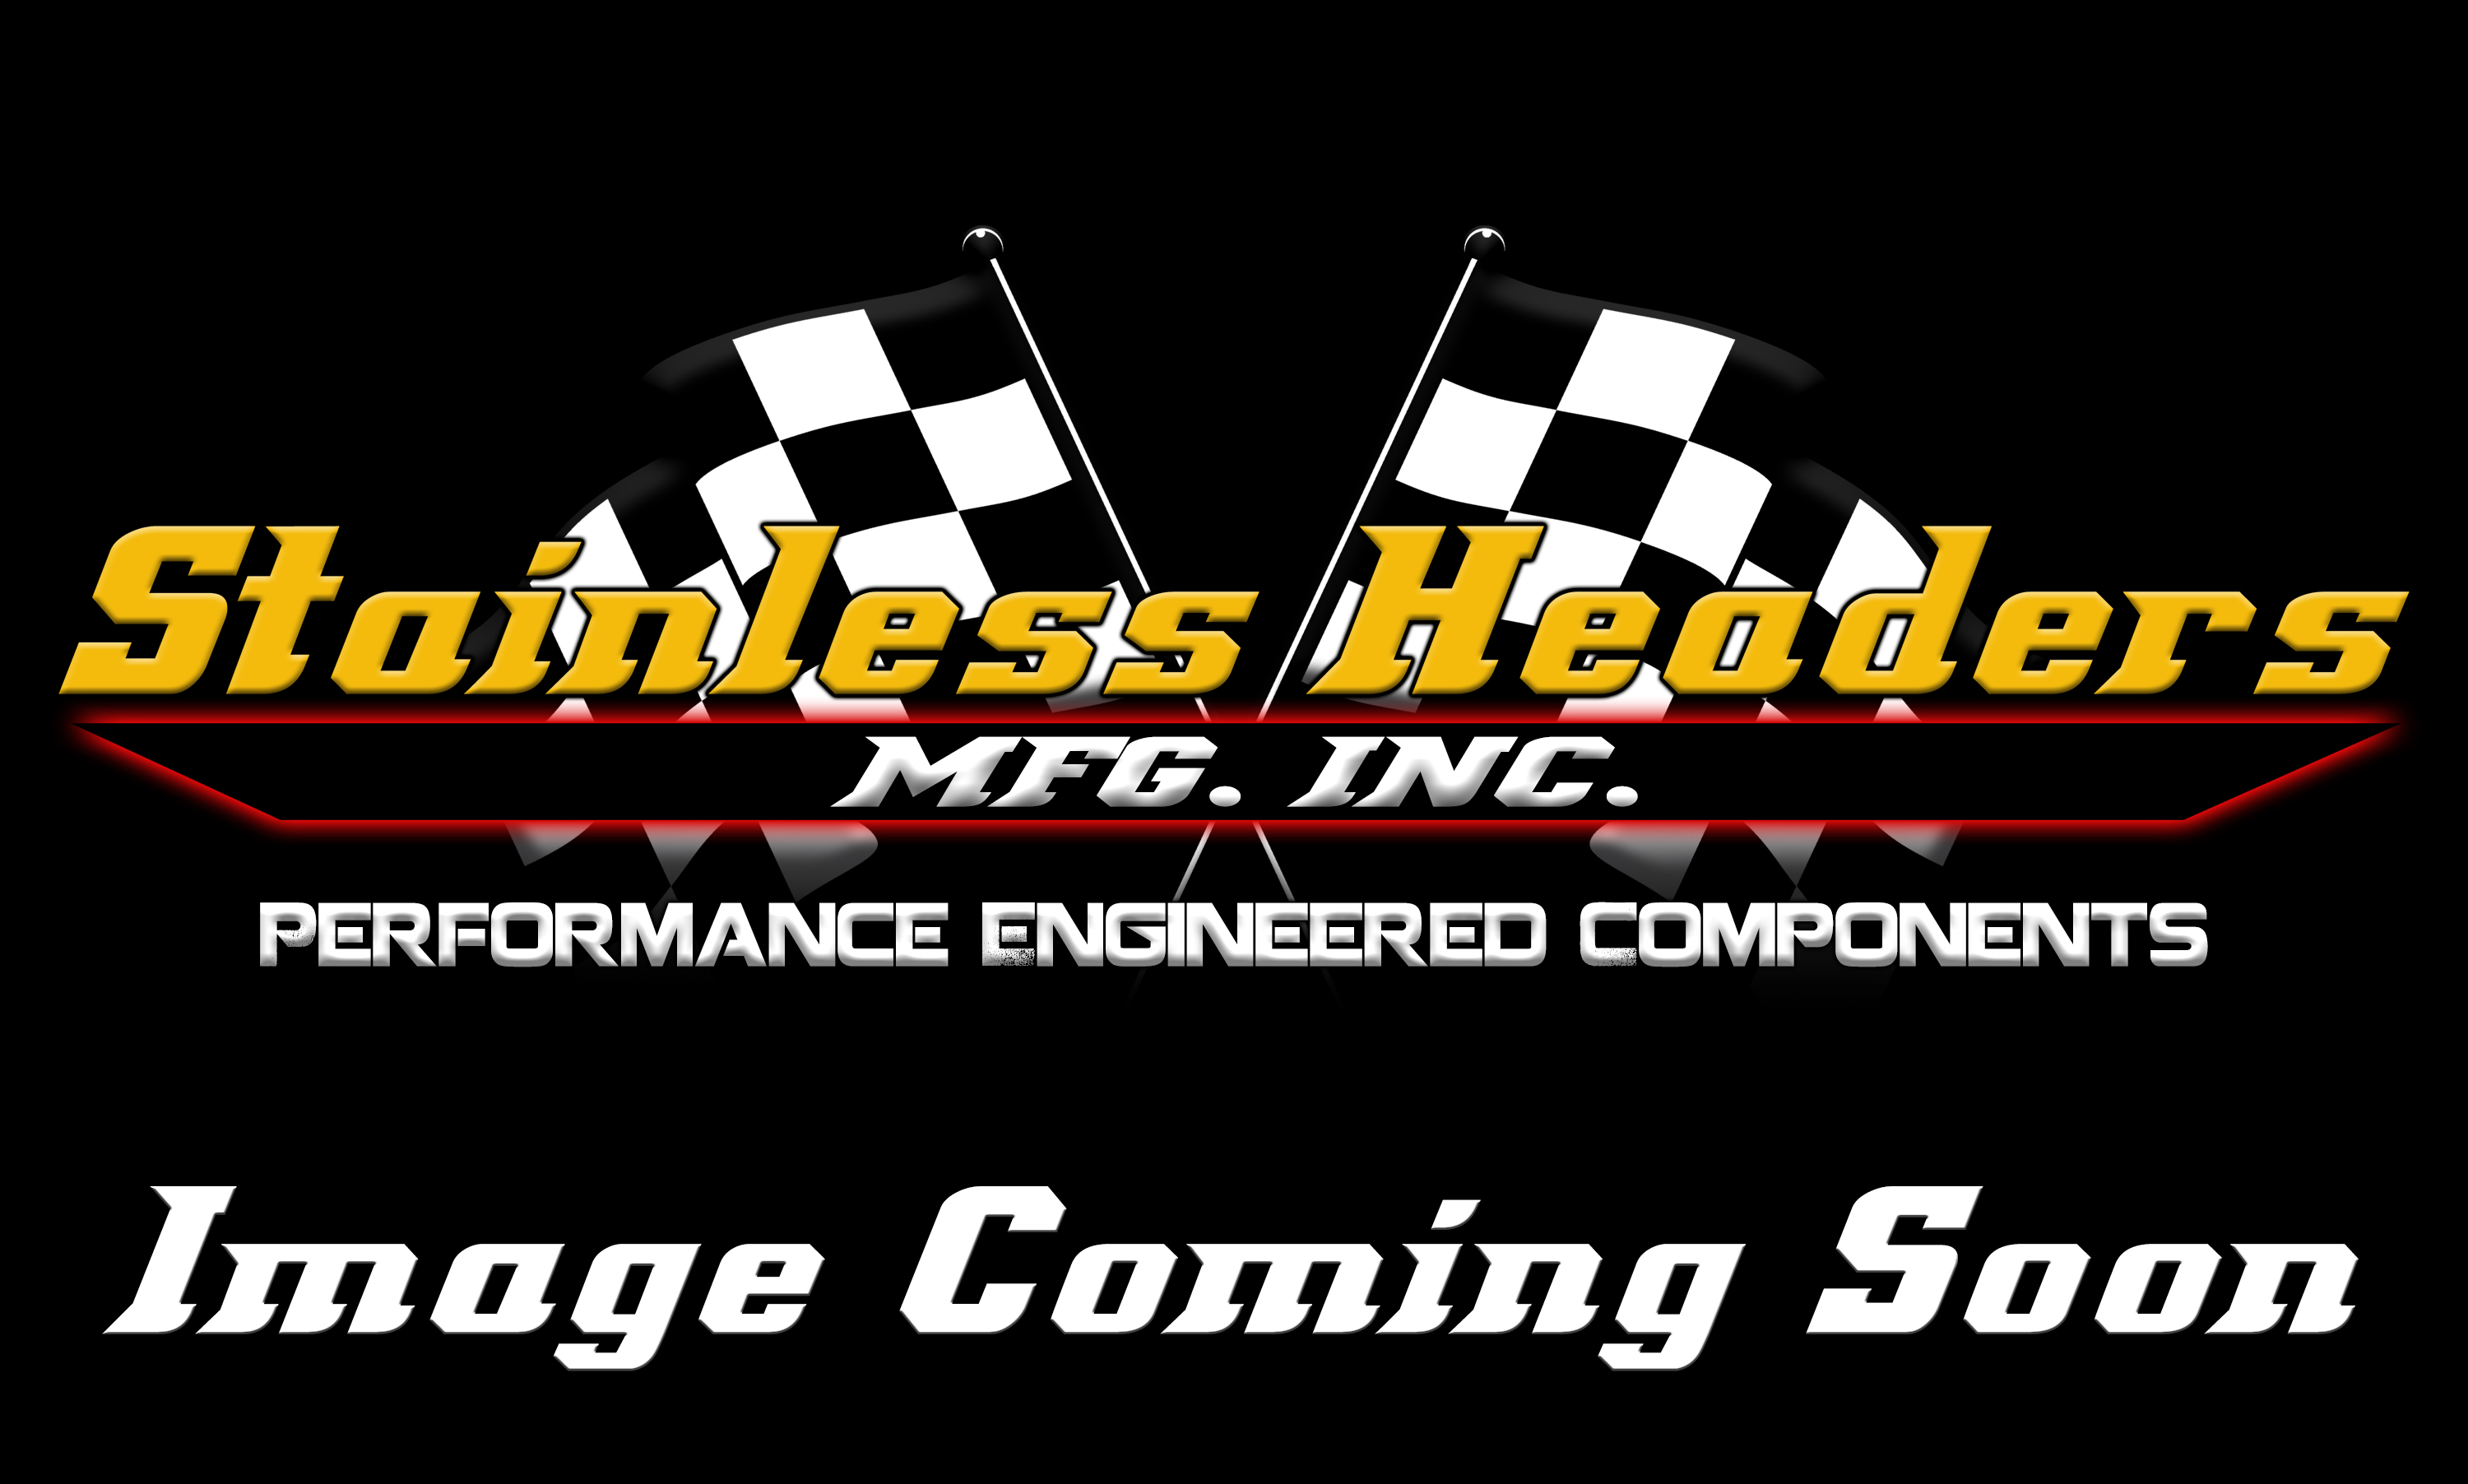 CompTurbo Technology Turbochargers - Comp Turbo Triple Ball Bearing Oil-Less 3.0 Turbochargers - CompTurbo Technologies - CTR4204R-7490 Mid Frame Oil-Less 3.0 Turbocharger (1300 HP)